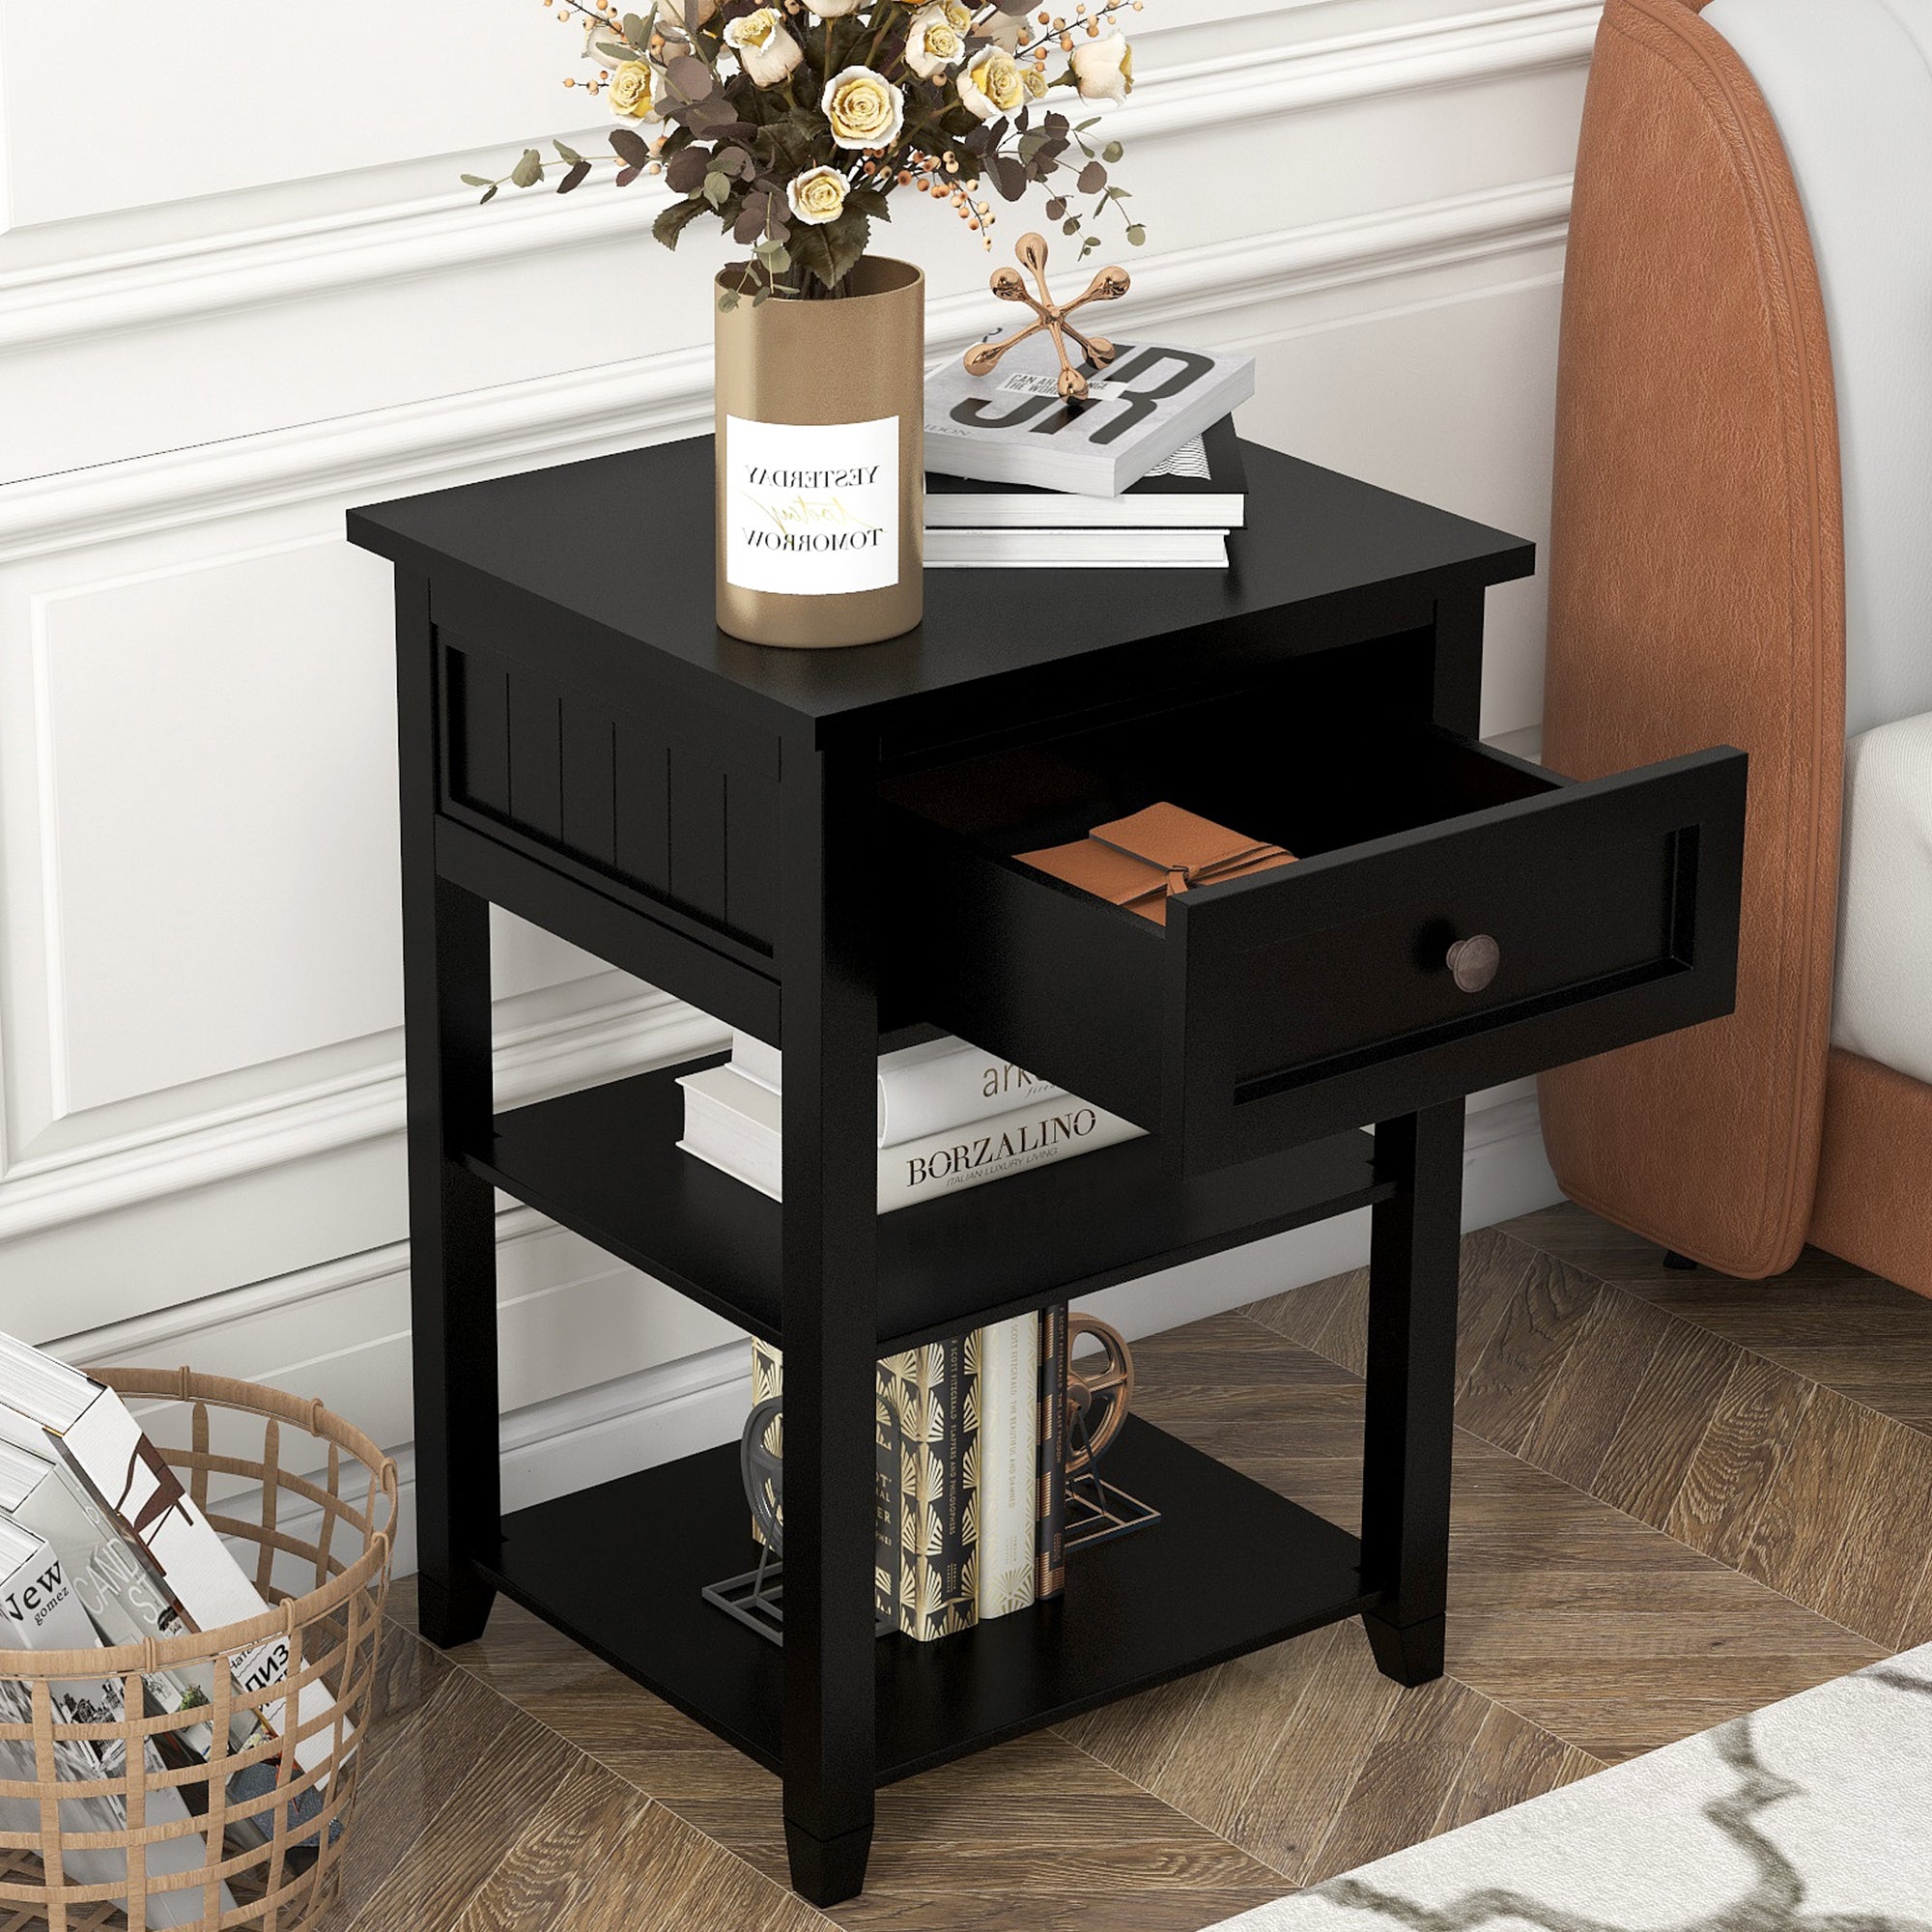 1-Drawer Wood Nightstand with Exterior Shelves